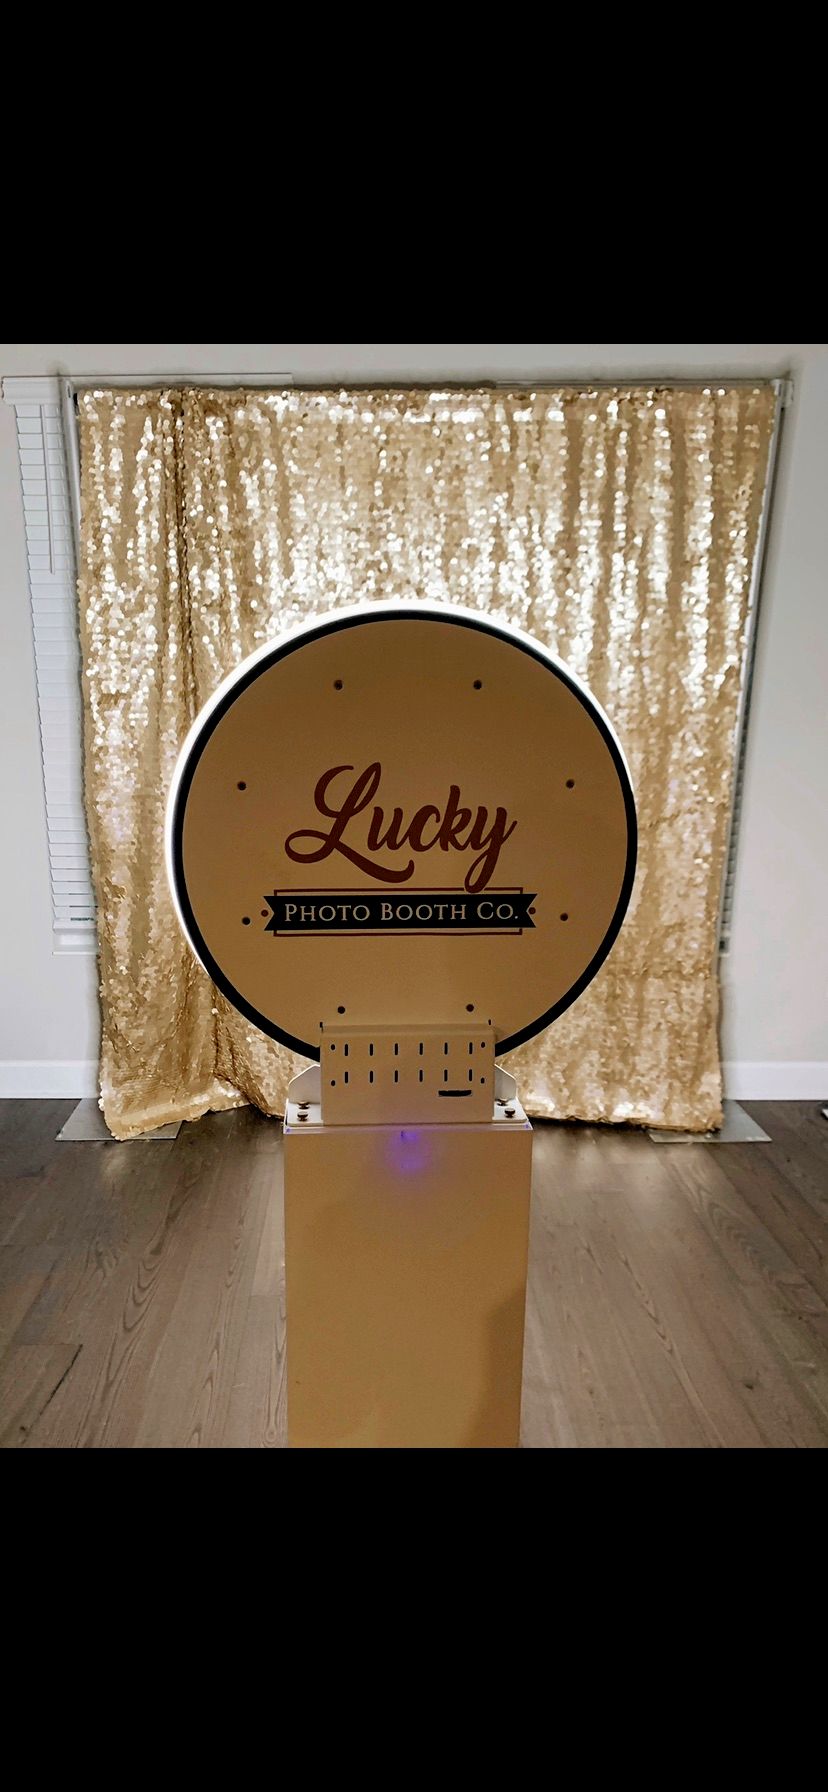 Lucky Photo Booth